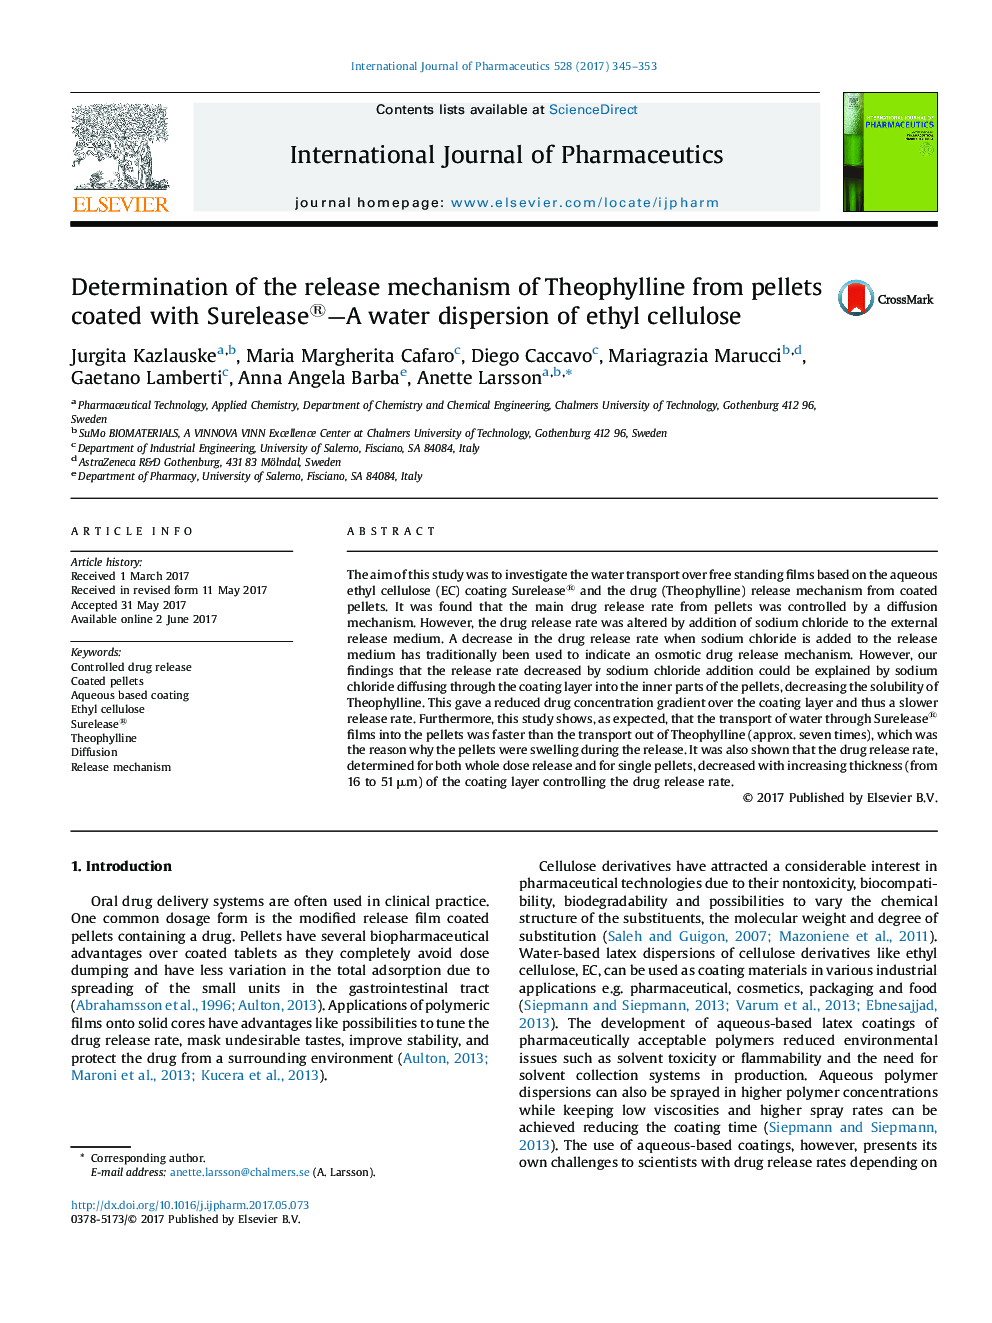 Determination of the release mechanism of Theophylline from pellets coated with Surelease®-A water dispersion of ethyl cellulose